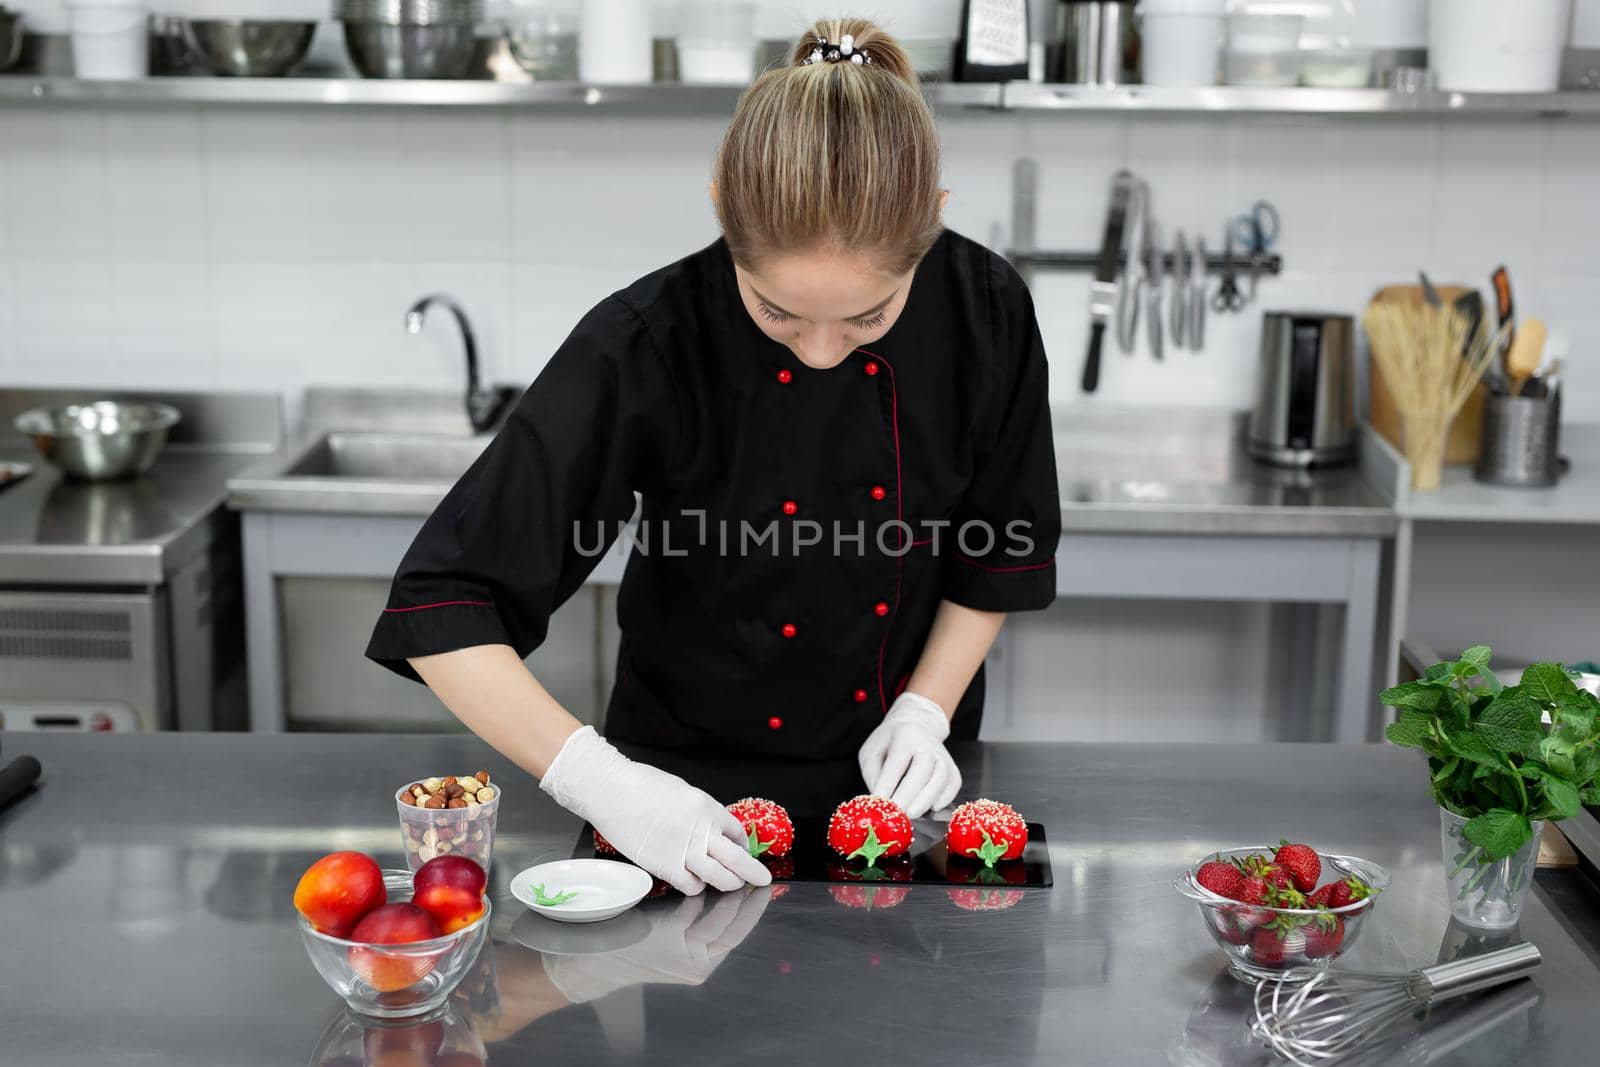 The pastry chef decorates the red mousse cake like a strawberry.